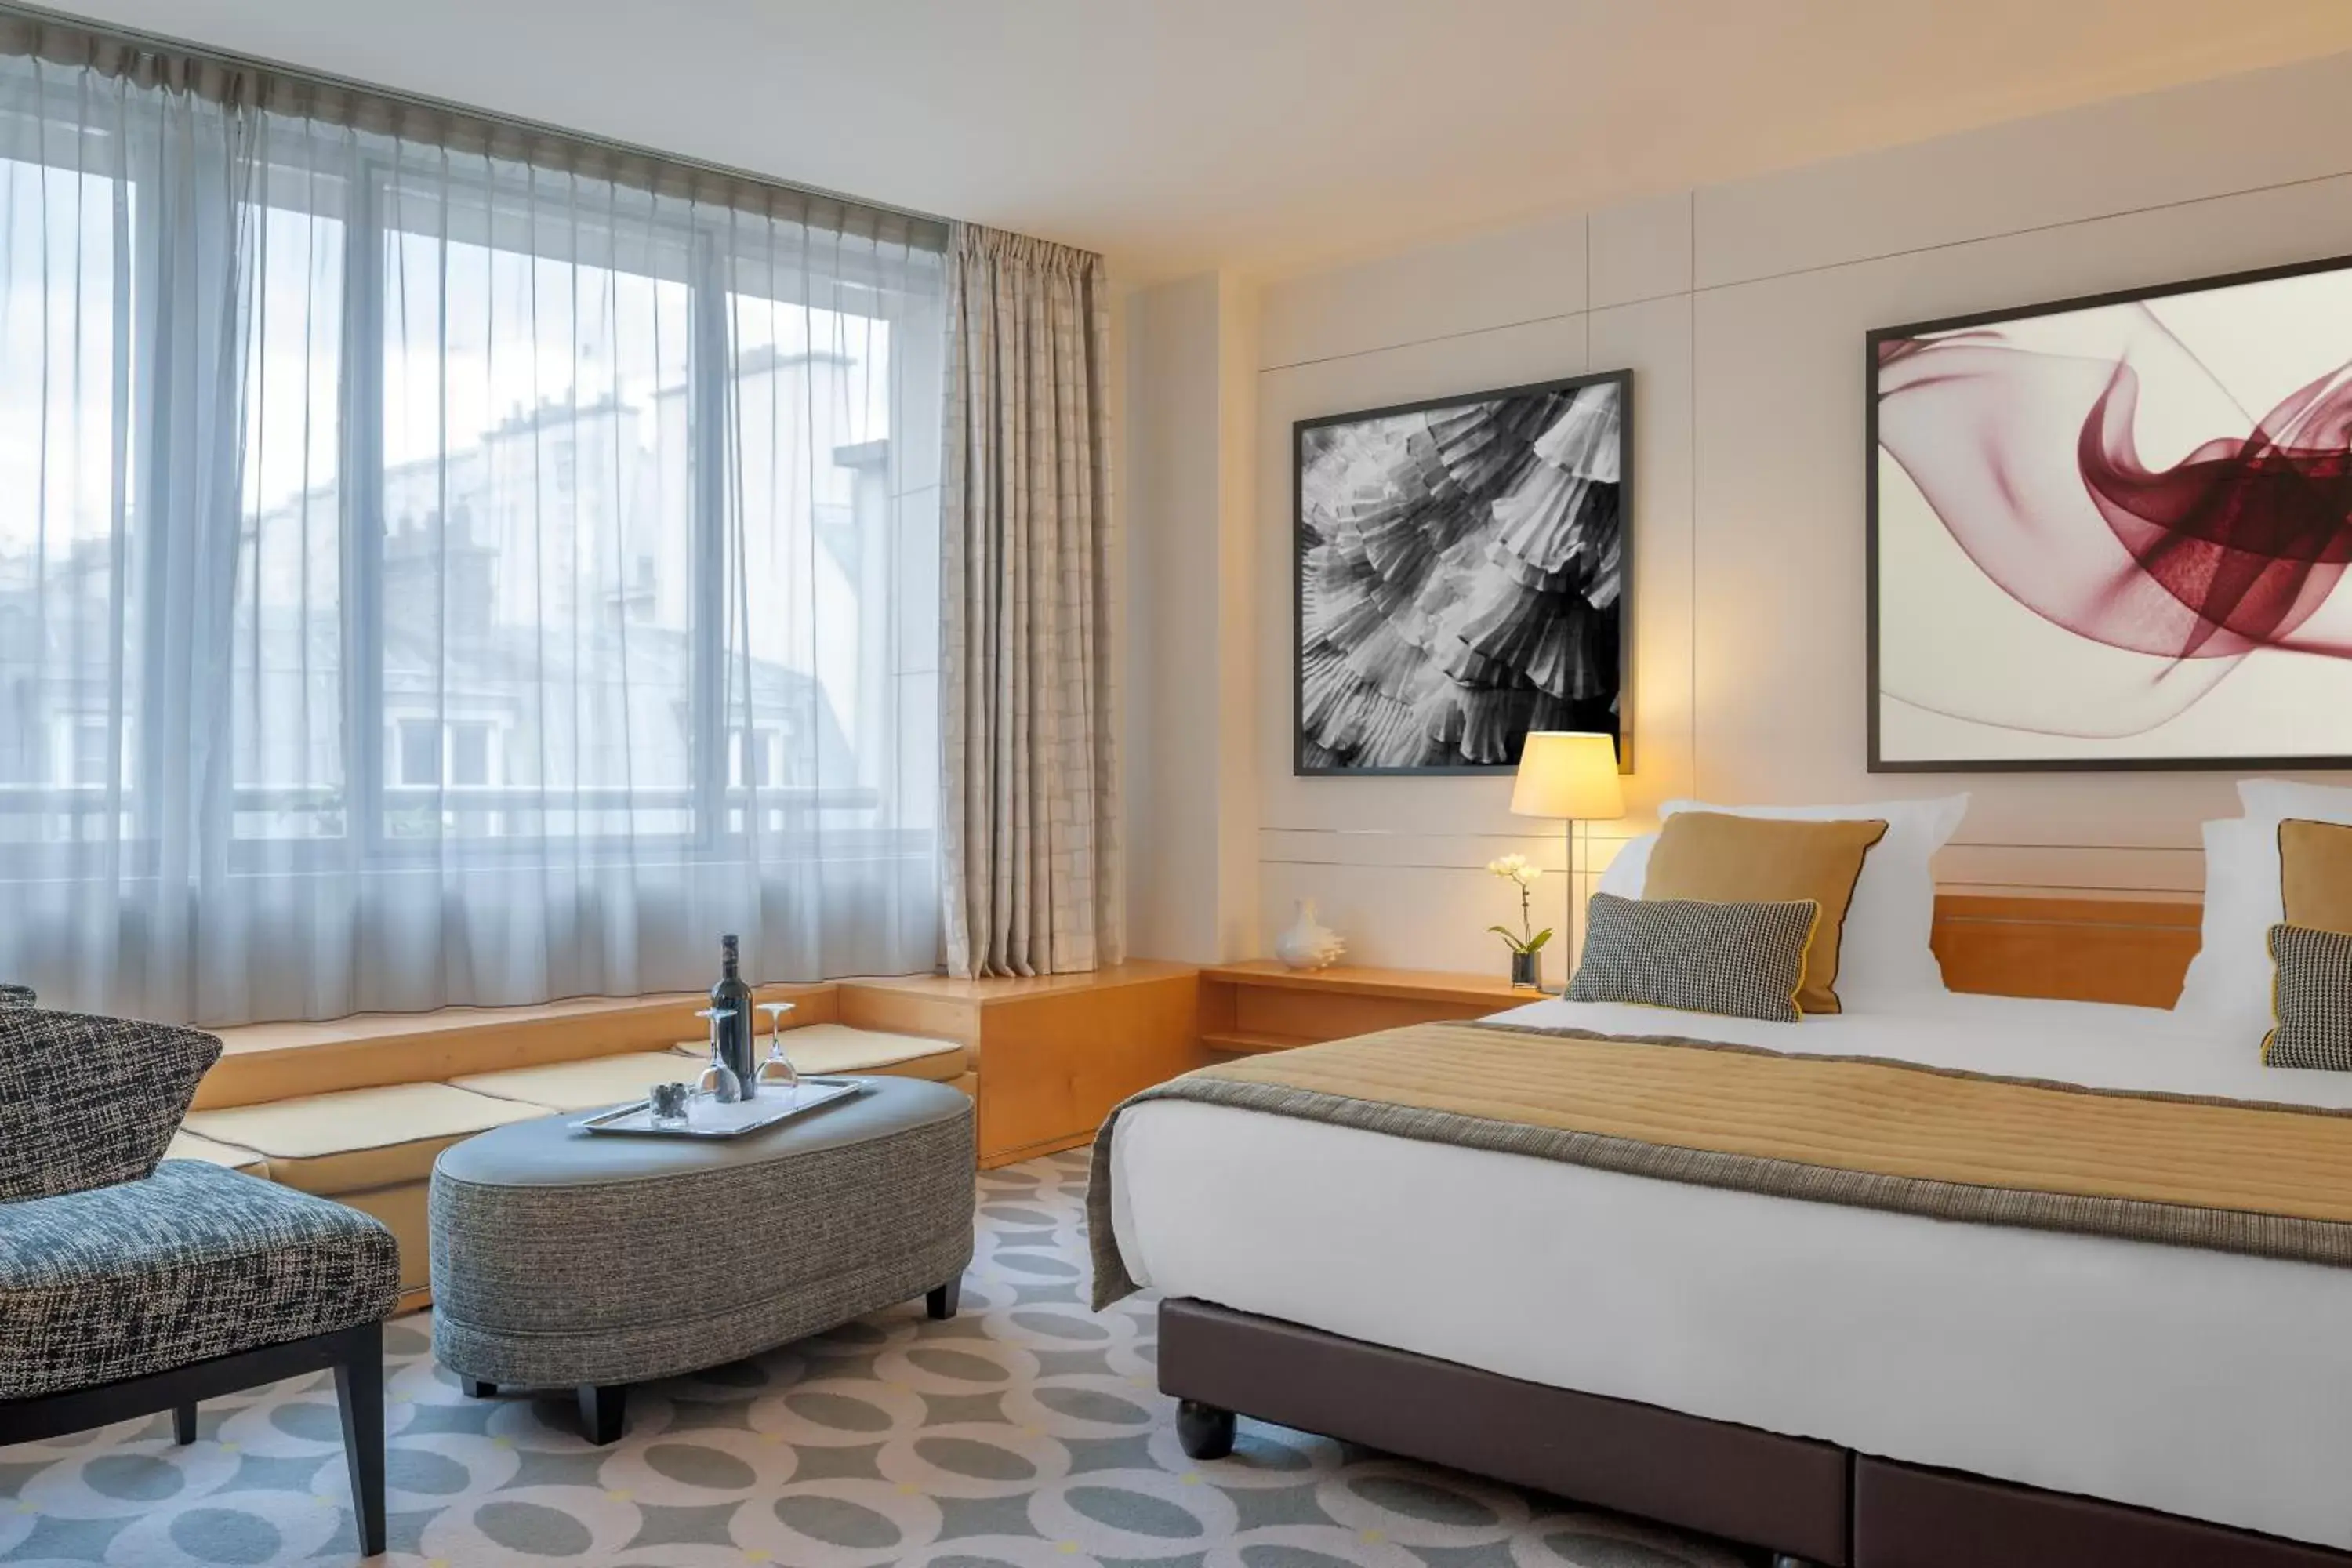 Bedroom, Room Photo in La Clef Tour Eiffel Paris by The Crest Collection